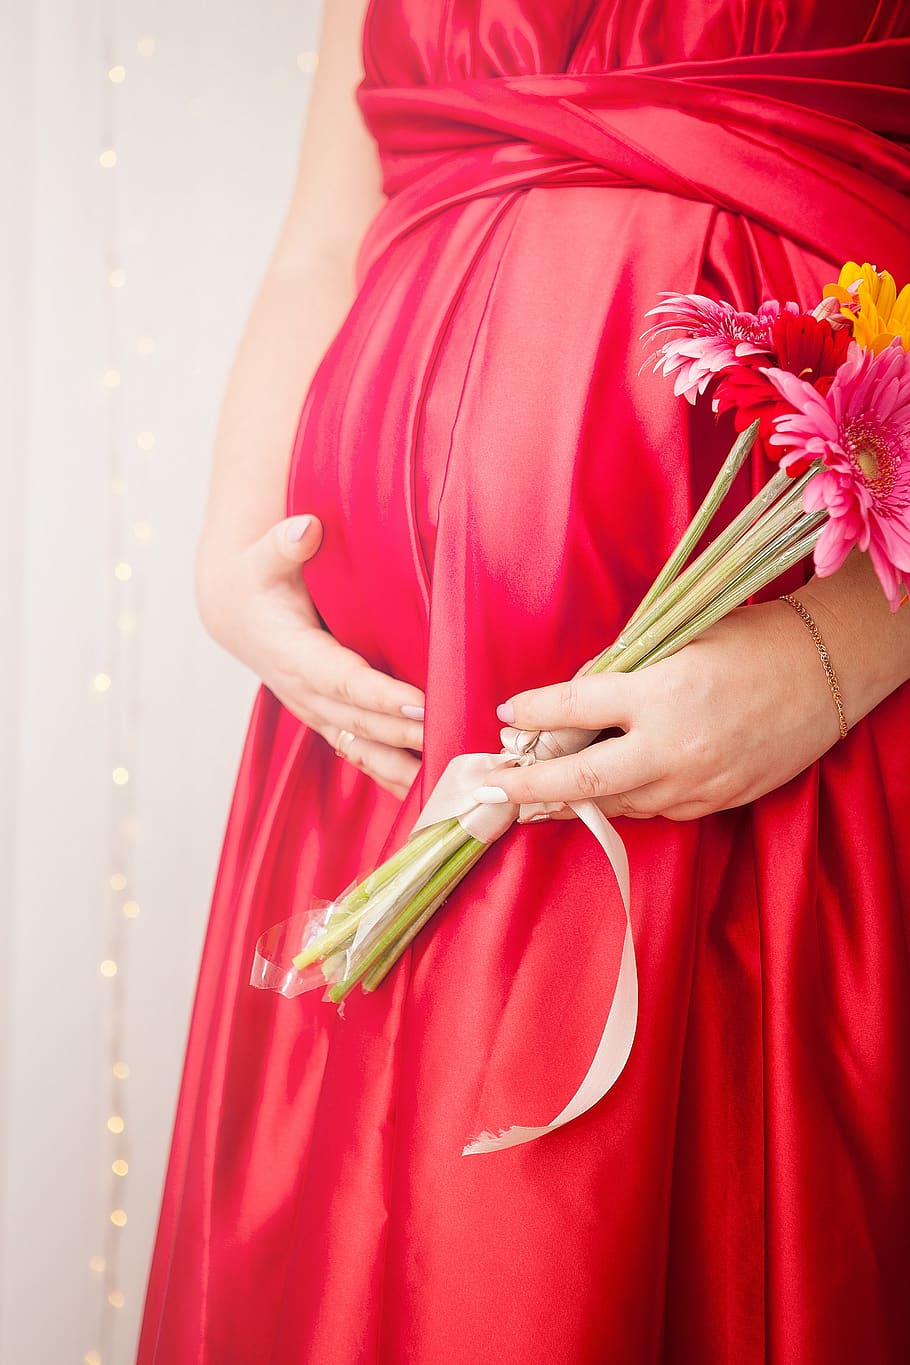 woman, grown up, lovely, pregnancy, belly, tummy, nice dress, flowers, hands, bouquet of flowers